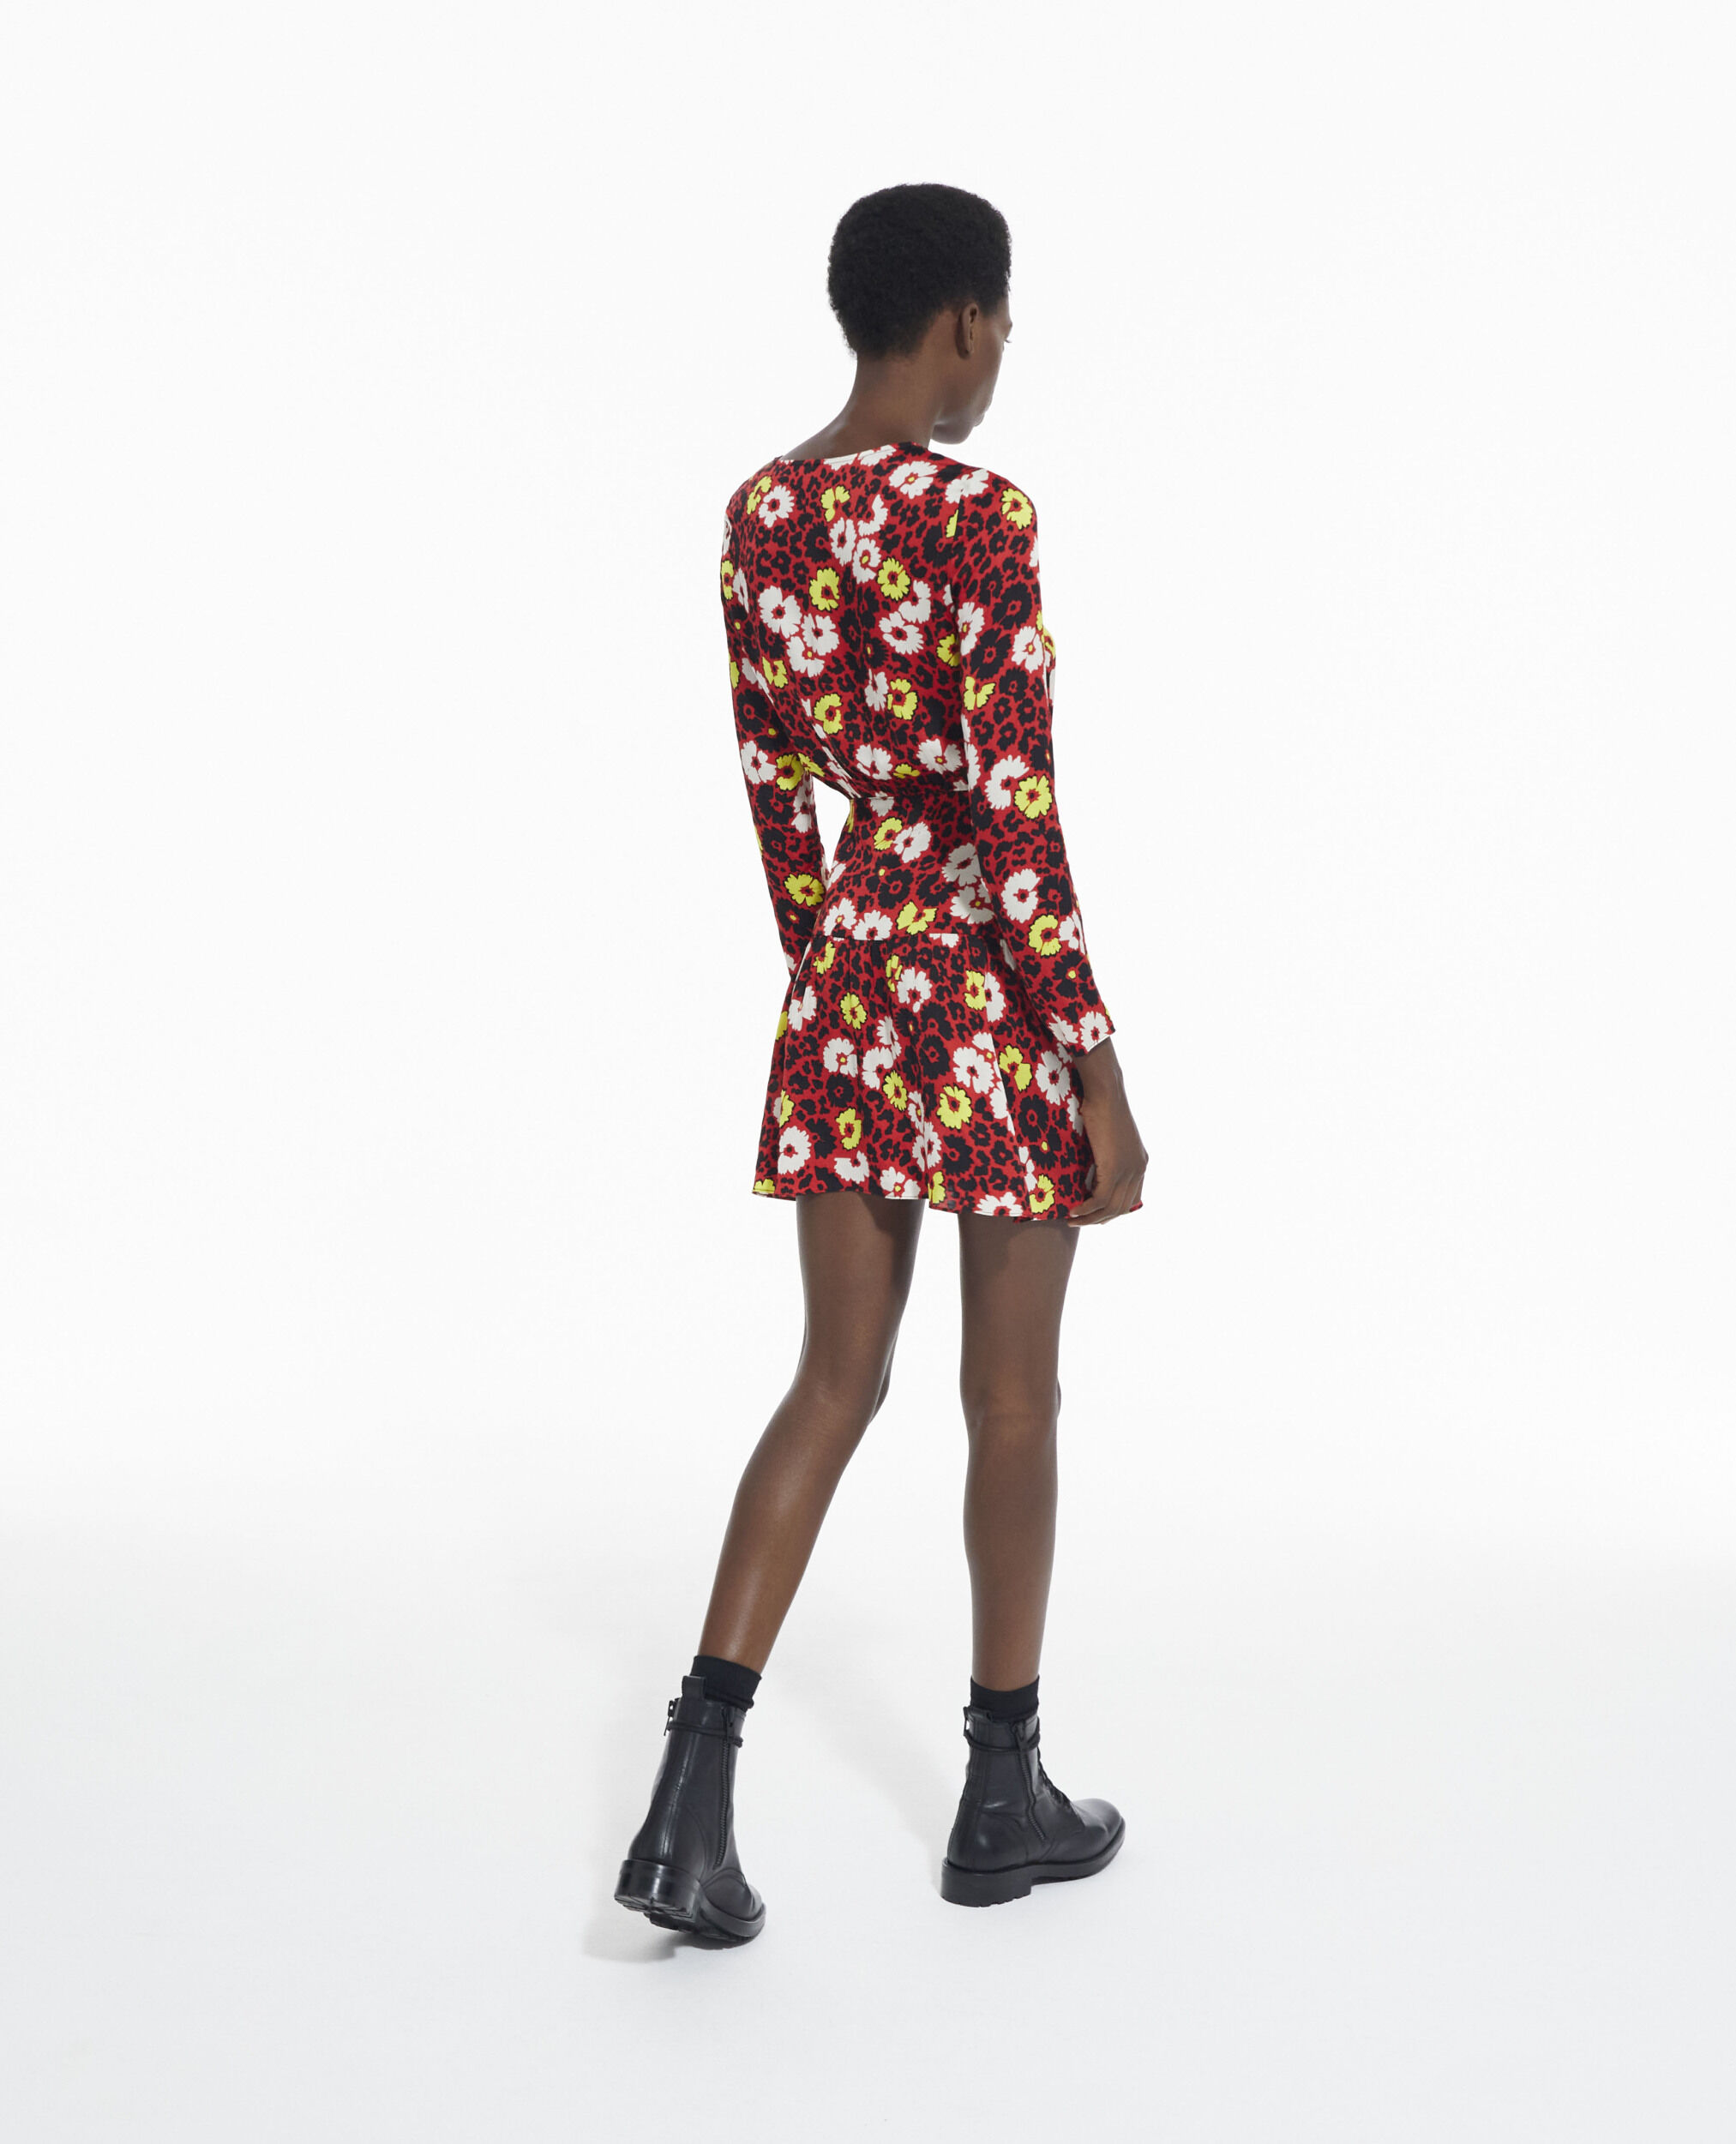 Floral print short dress, RED / YELLOW, hi-res image number null